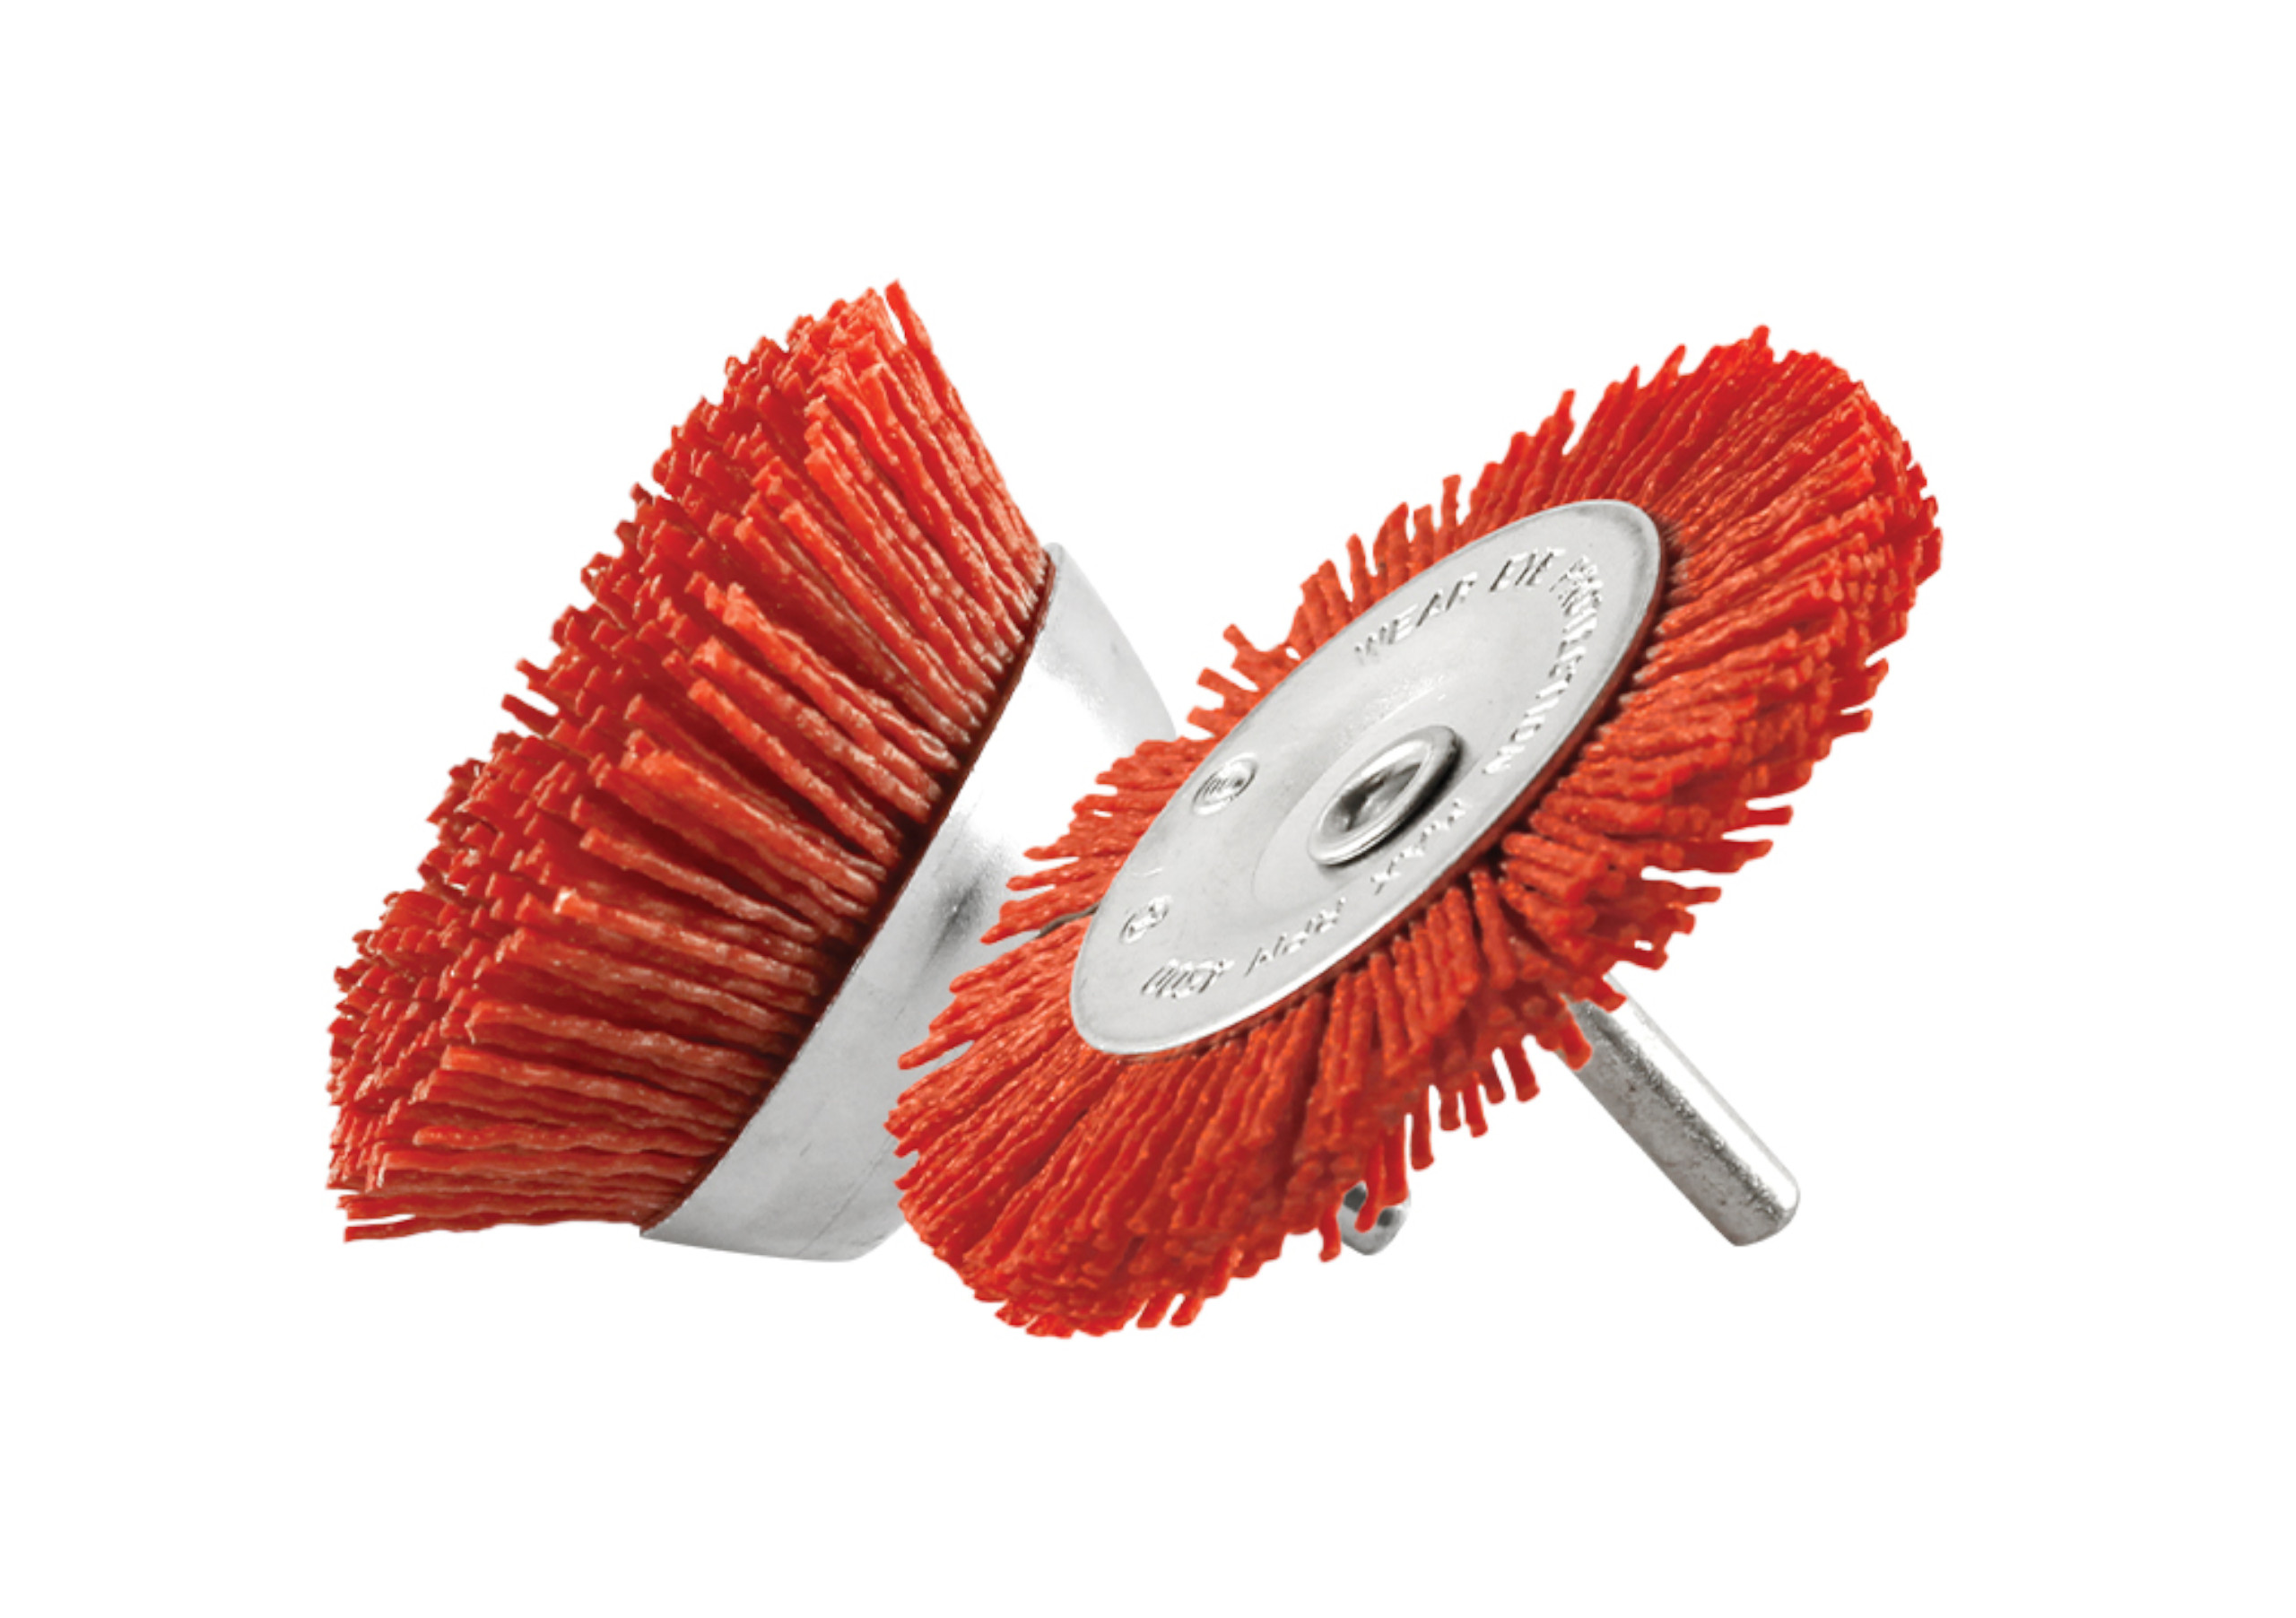 This is an image of our Filament Wire Brushes